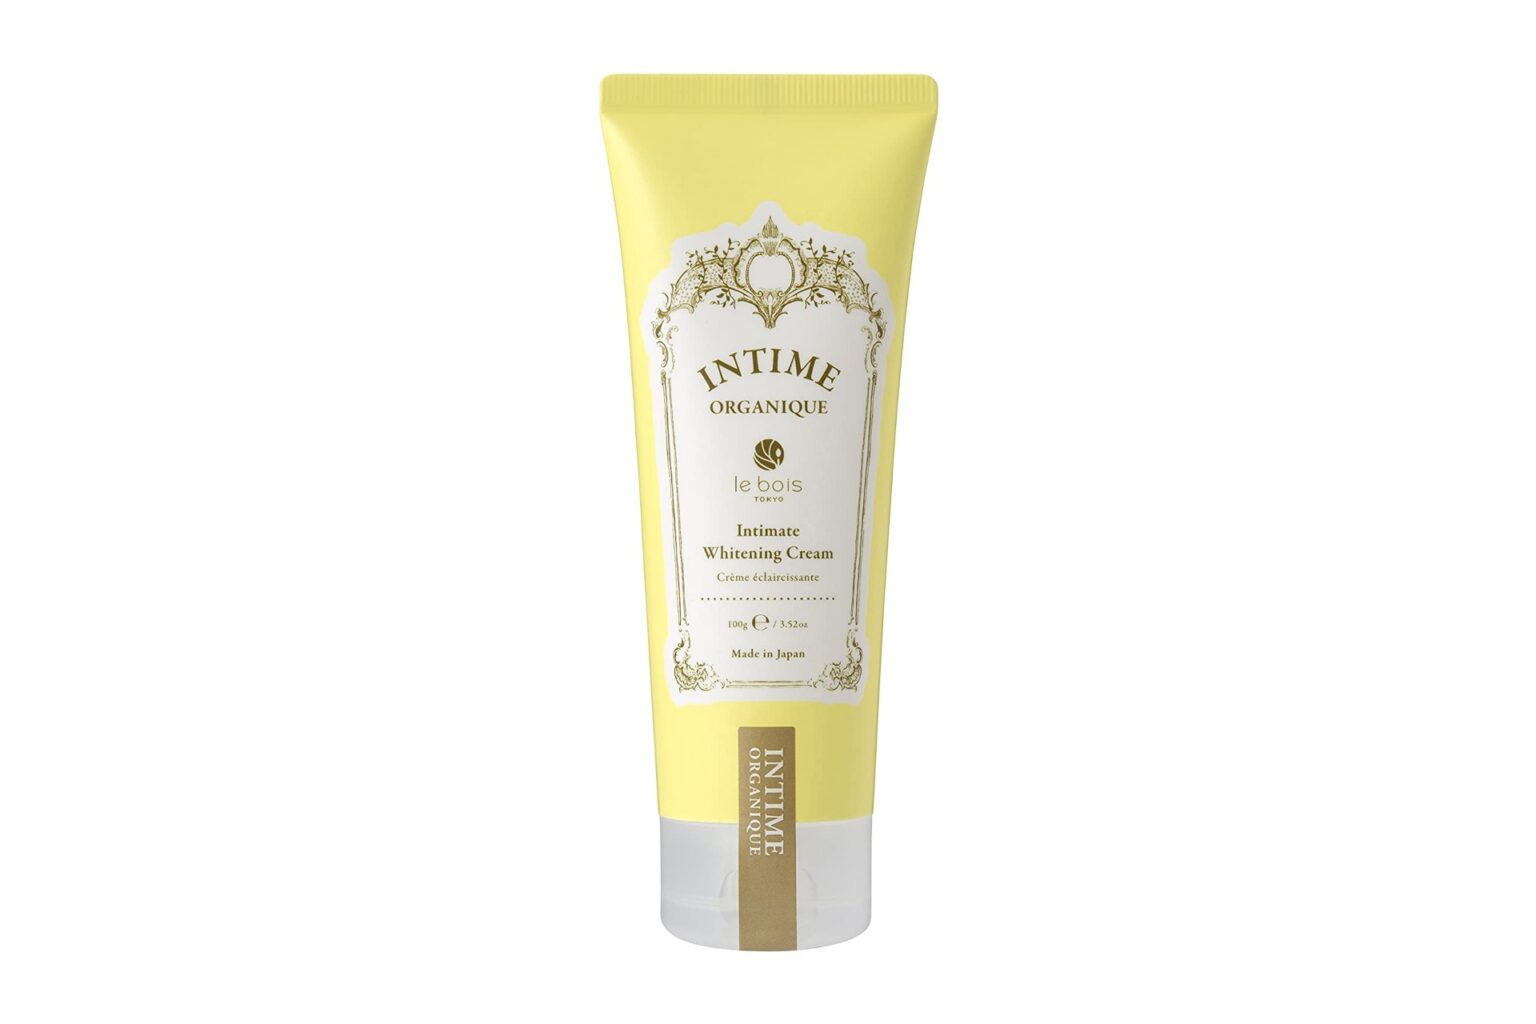 「Whitening Cream」100g 2,600円（INTIME ORGANIQUE by le bois 0120-550-626）